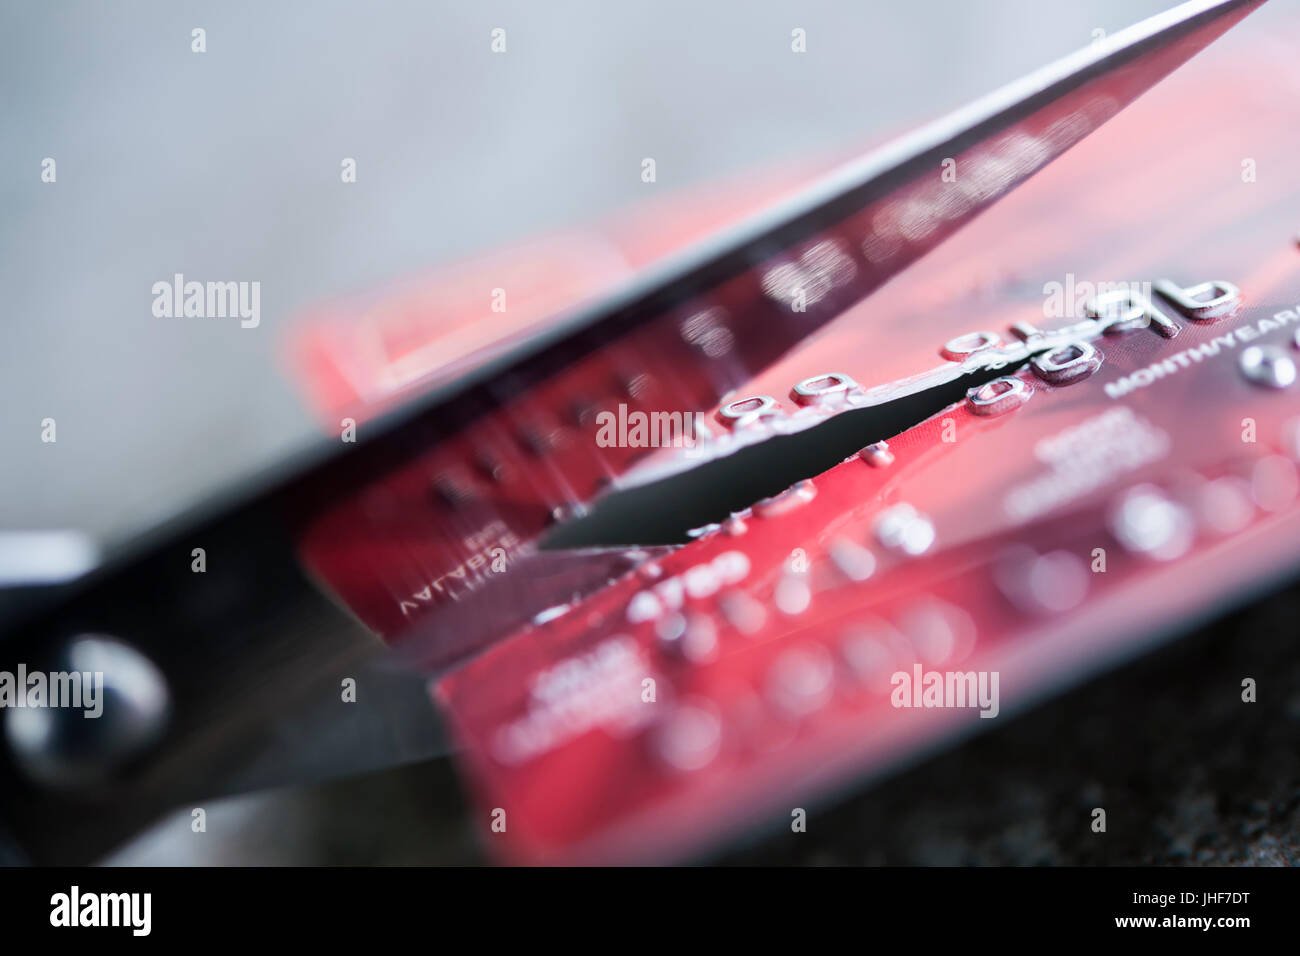 Credit card being cut with scissors, close up. Stock Photo